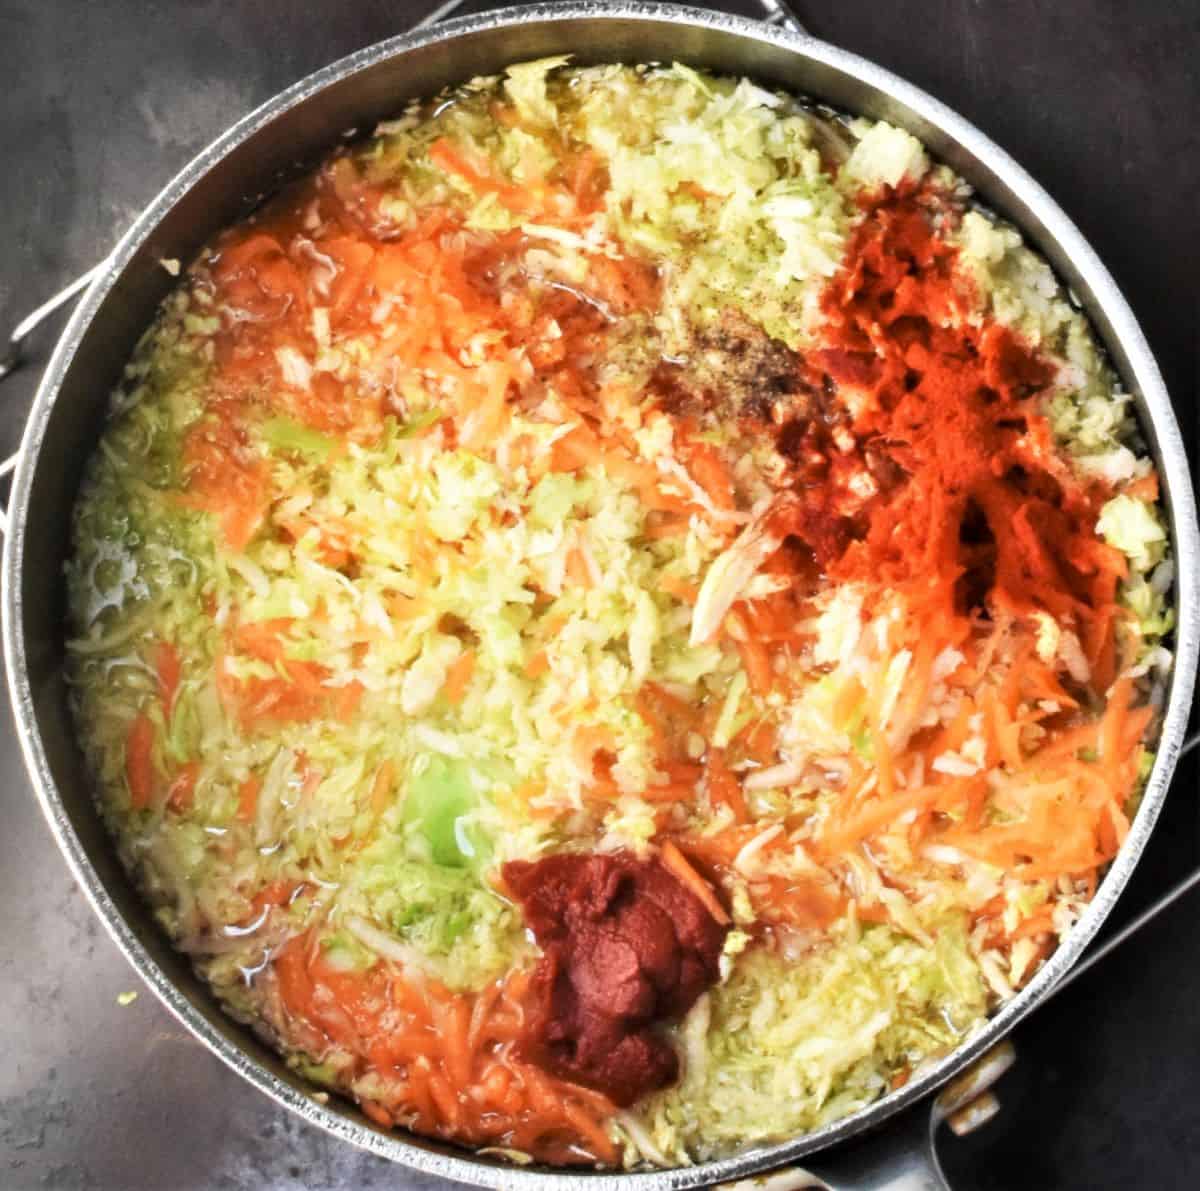 Shredded cabbage, carrot and spices in large pot.